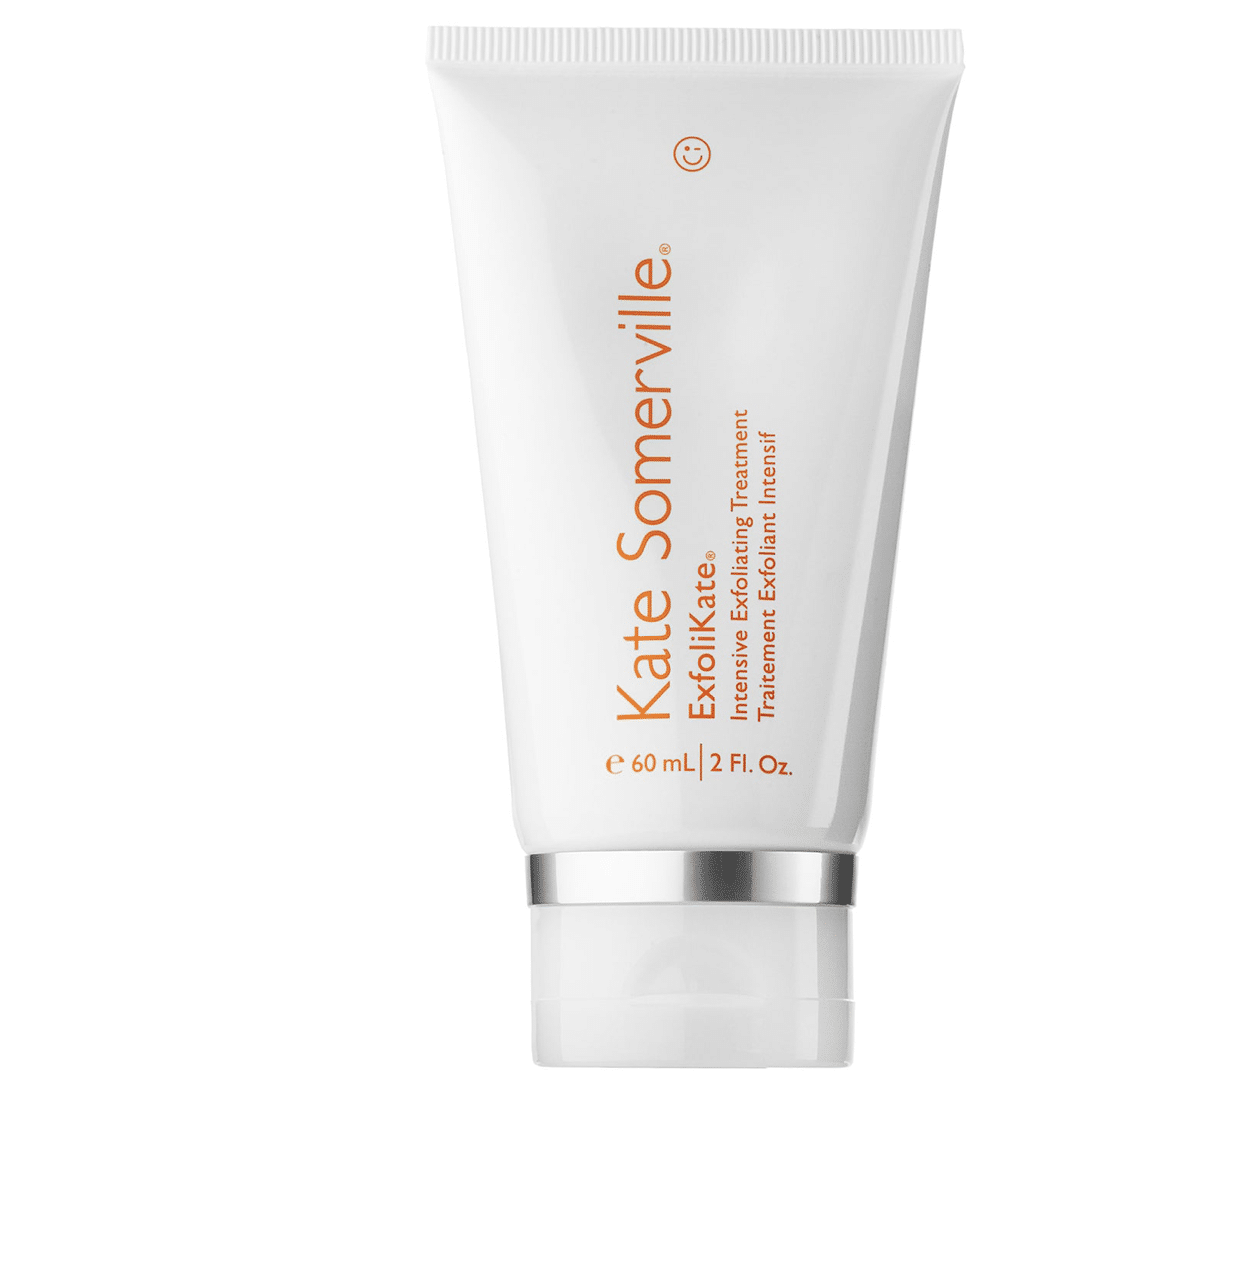 Best Face Exfoliator for Mature Skin, by lifestyle blogger What The Fab